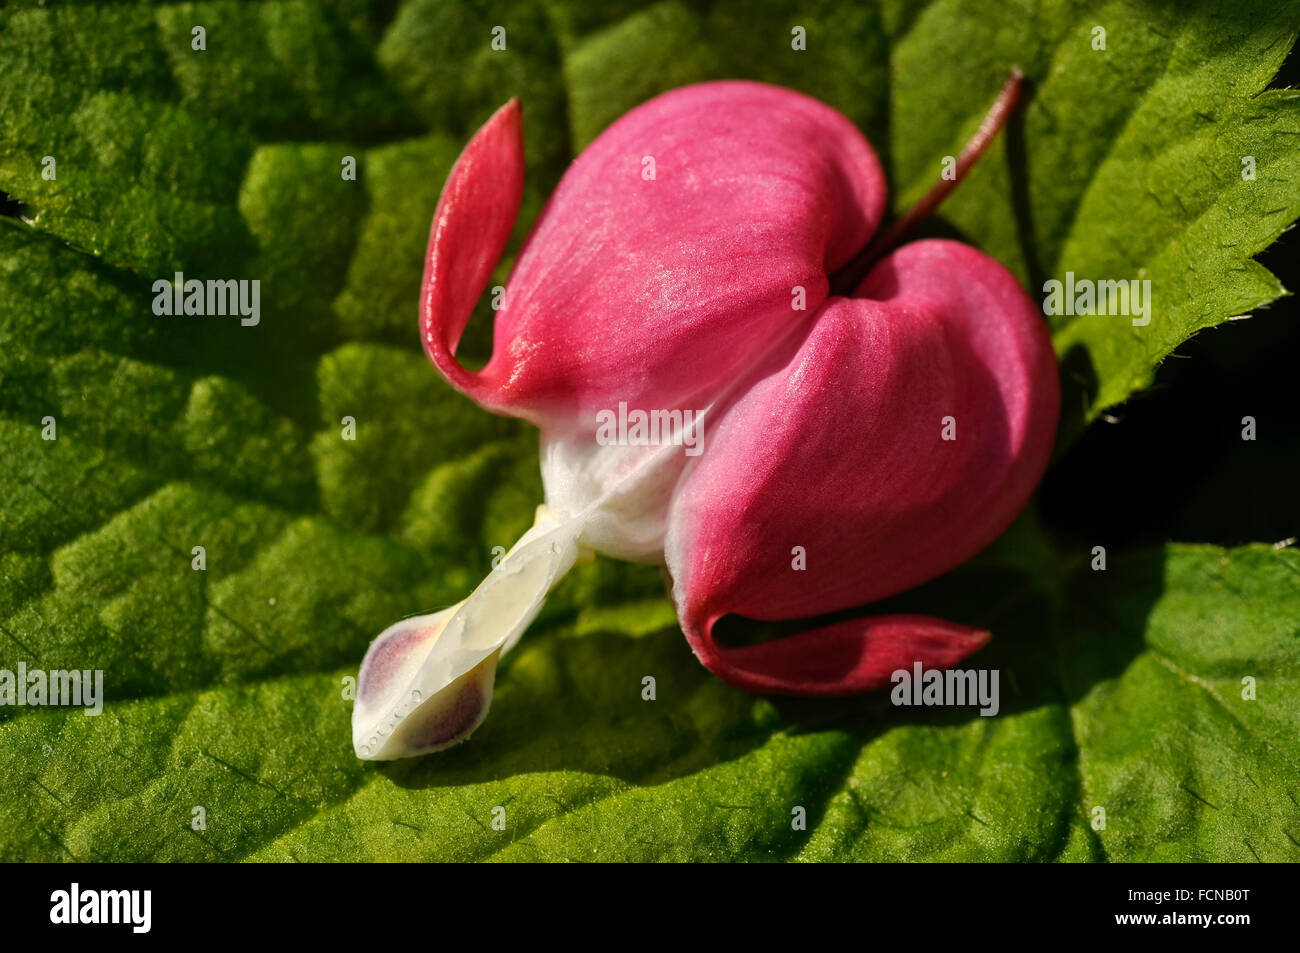 Red heart shaped flower called 'Bleeding Heart' (Dicentra Spectabilis) resting on a green leaf. Stock Photo